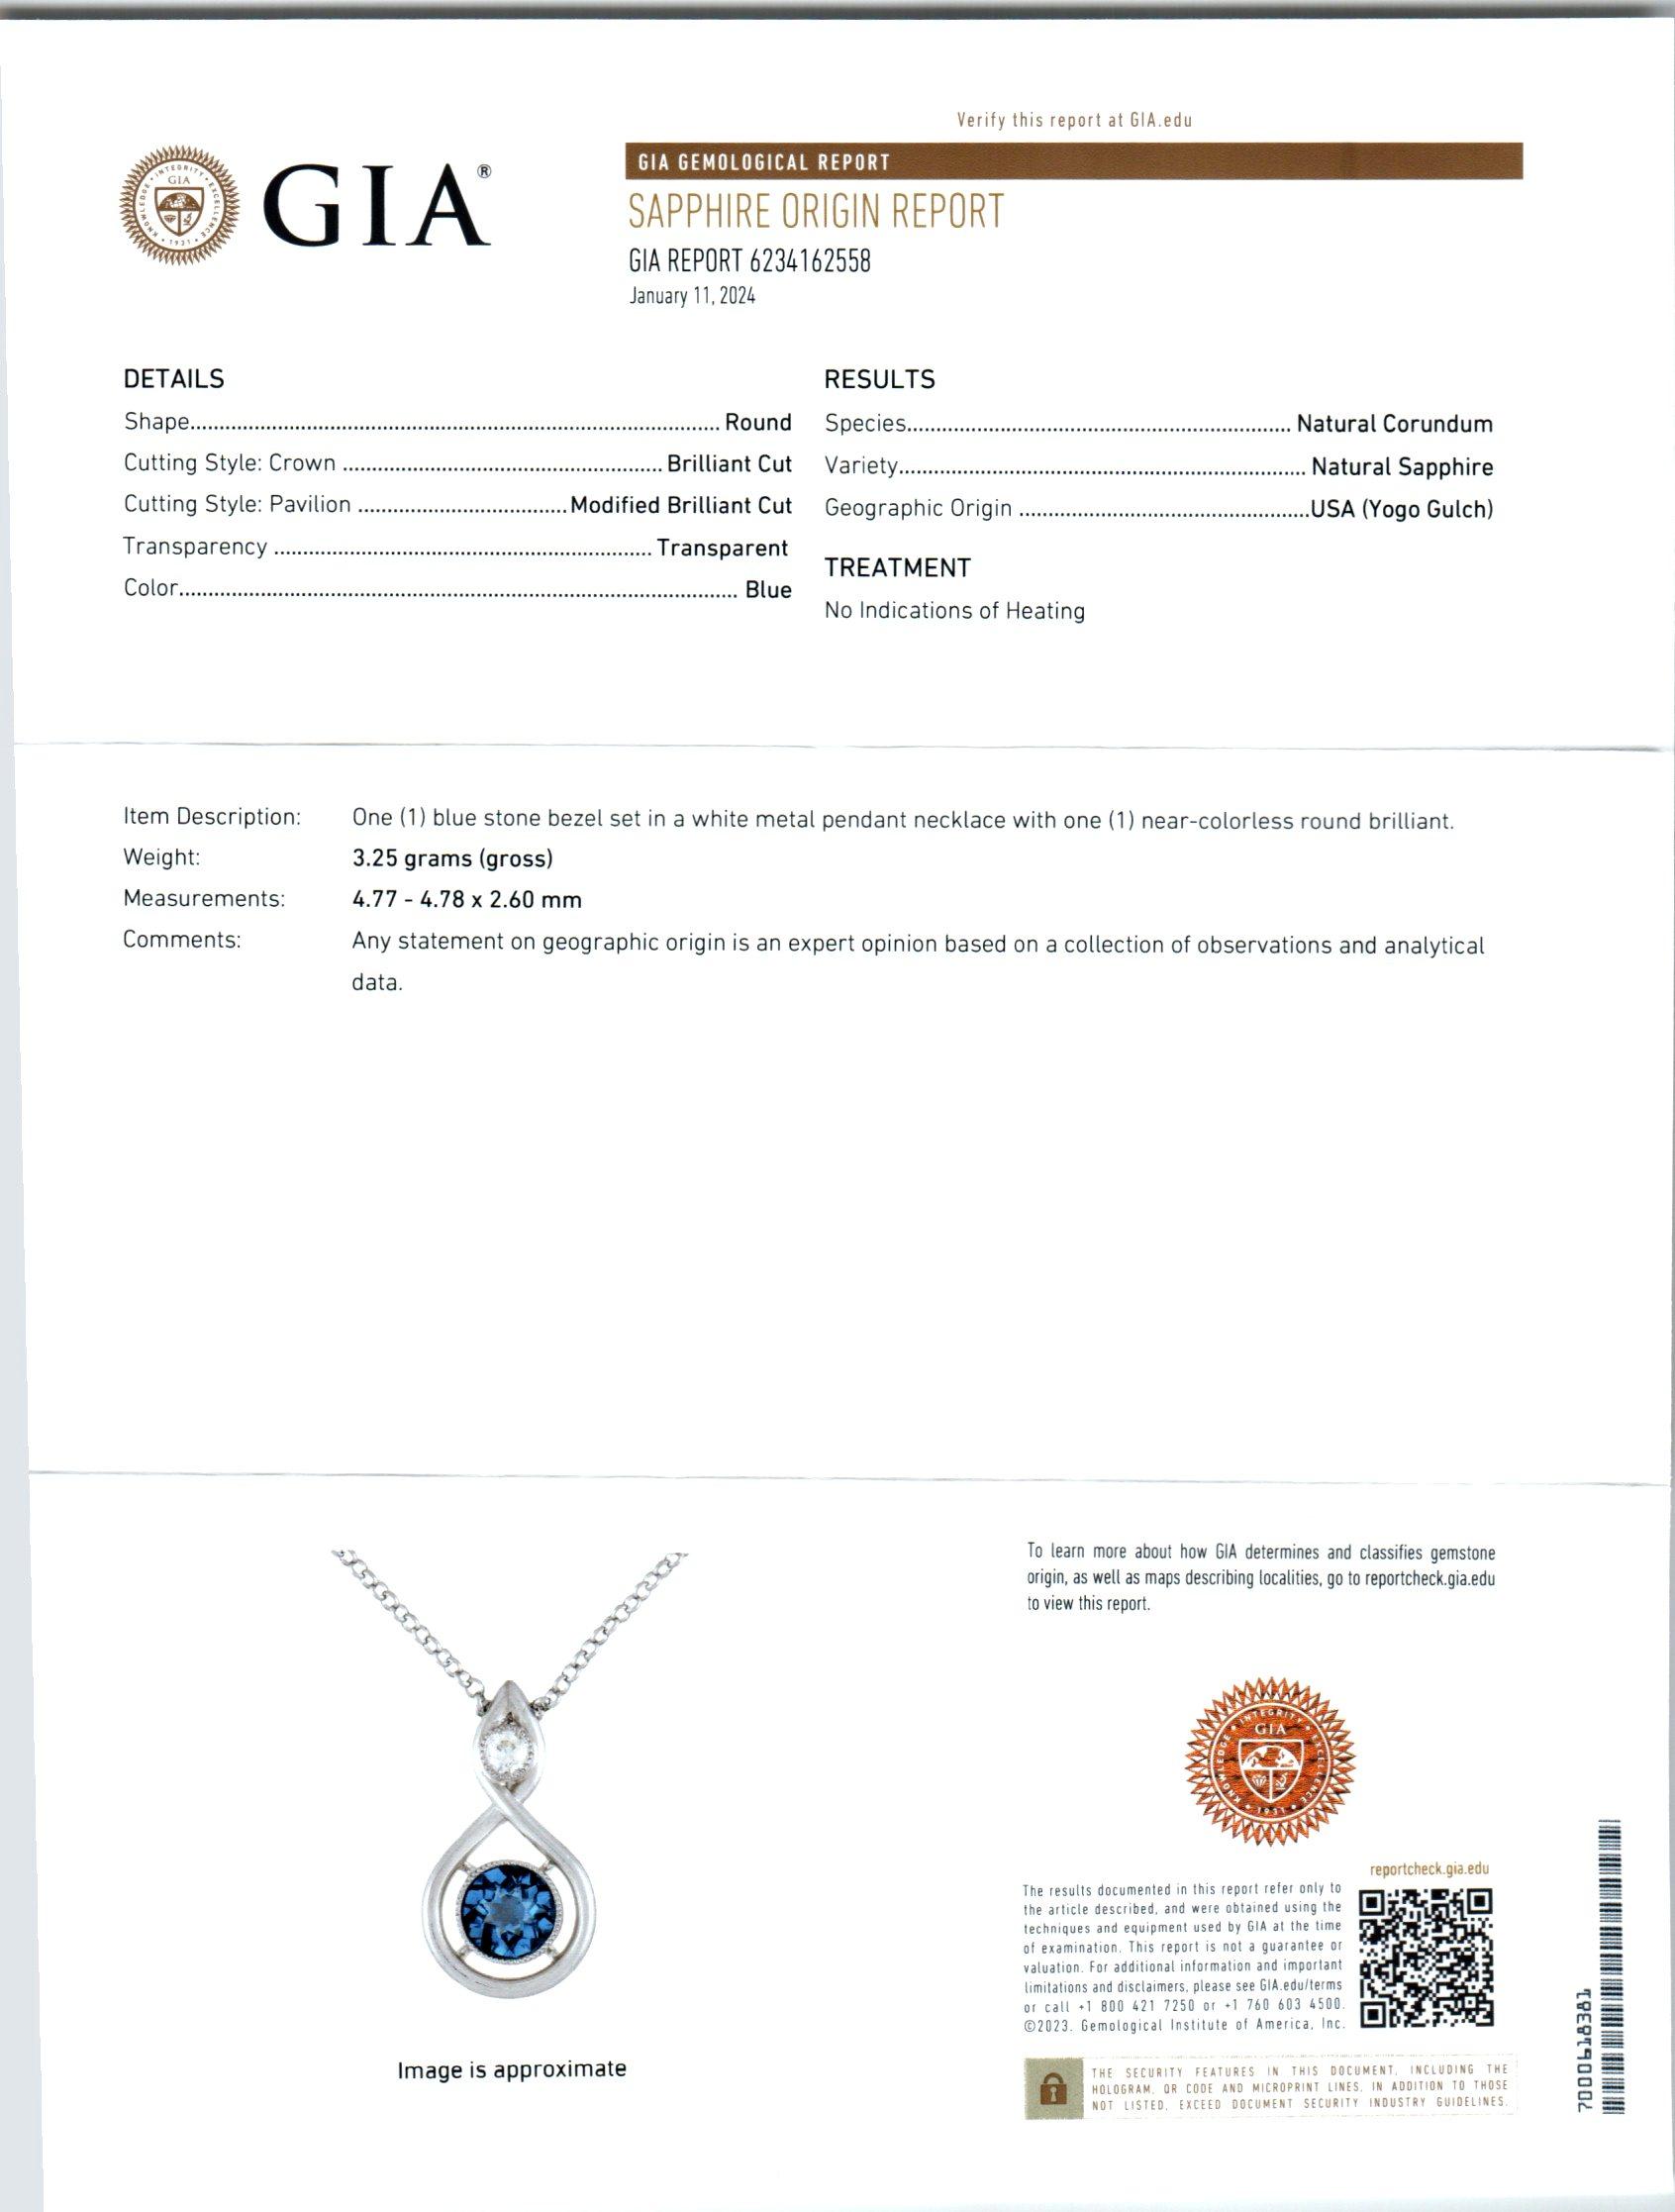 GIA Certified .43 Carat Yogo Gulch Montana Sapphire Diamond Platinum Necklace  In Good Condition For Sale In Stamford, CT